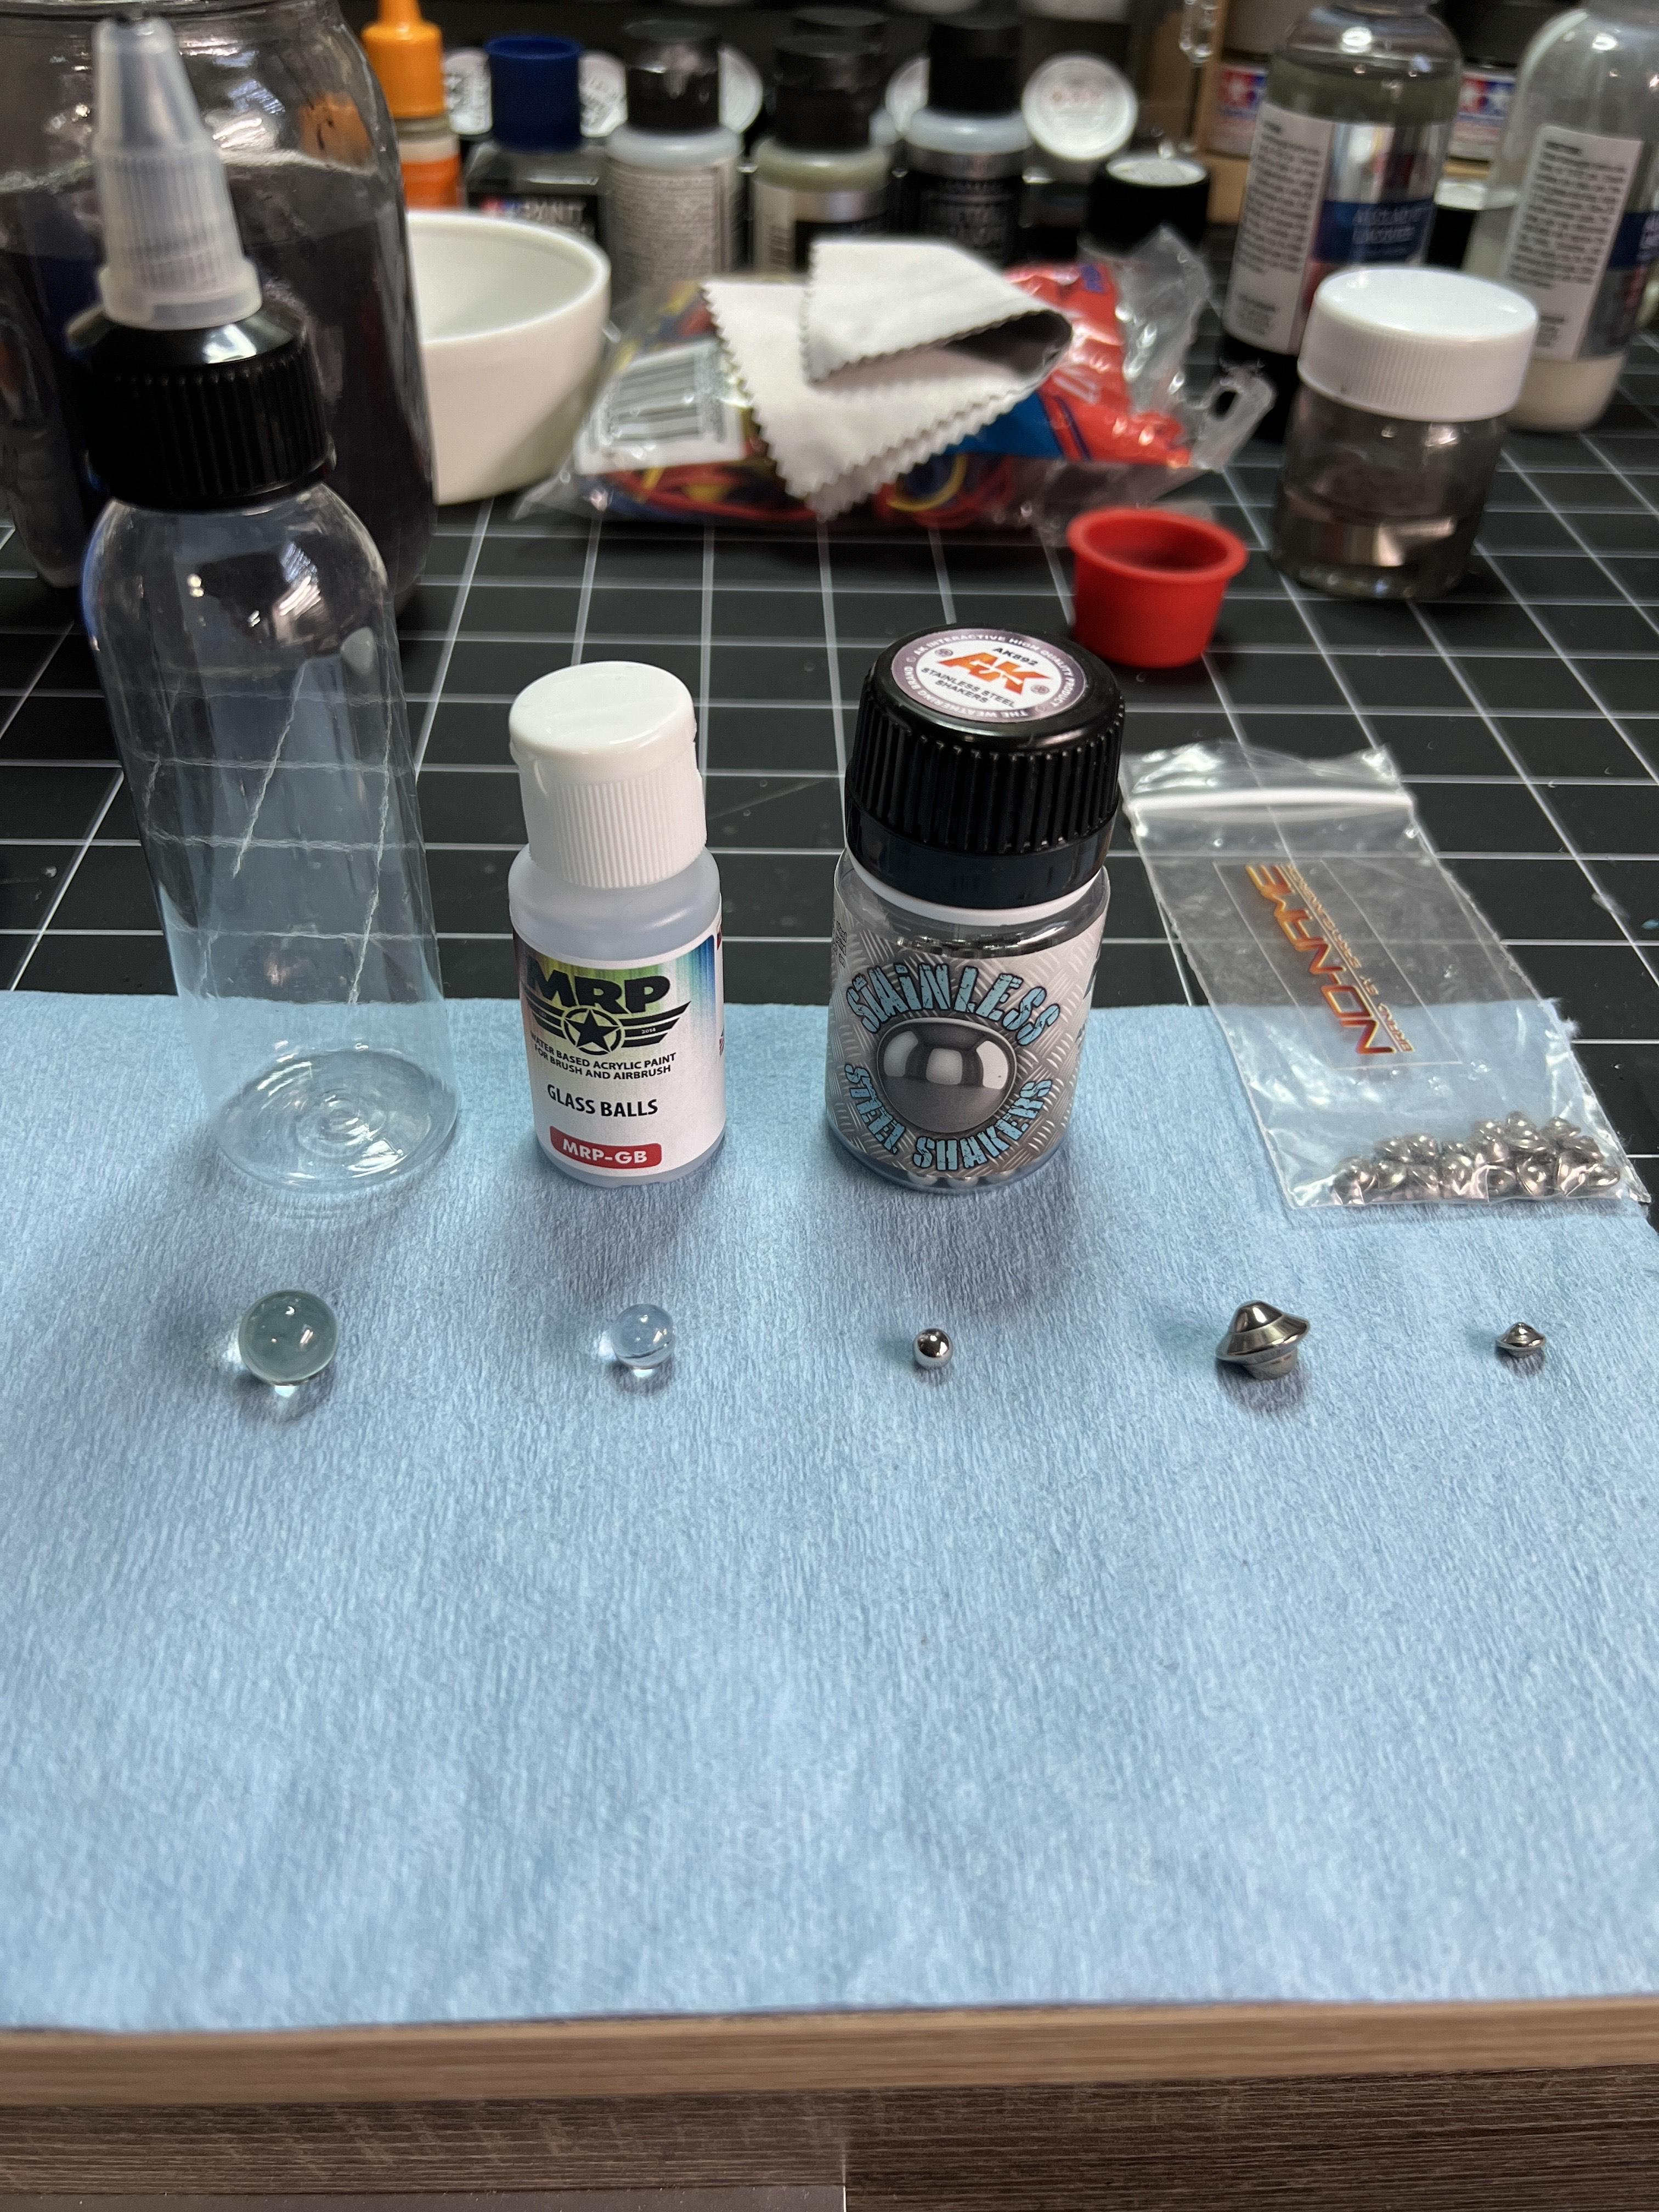 Best acrylic airbrush paint for paintings? : r/airbrush